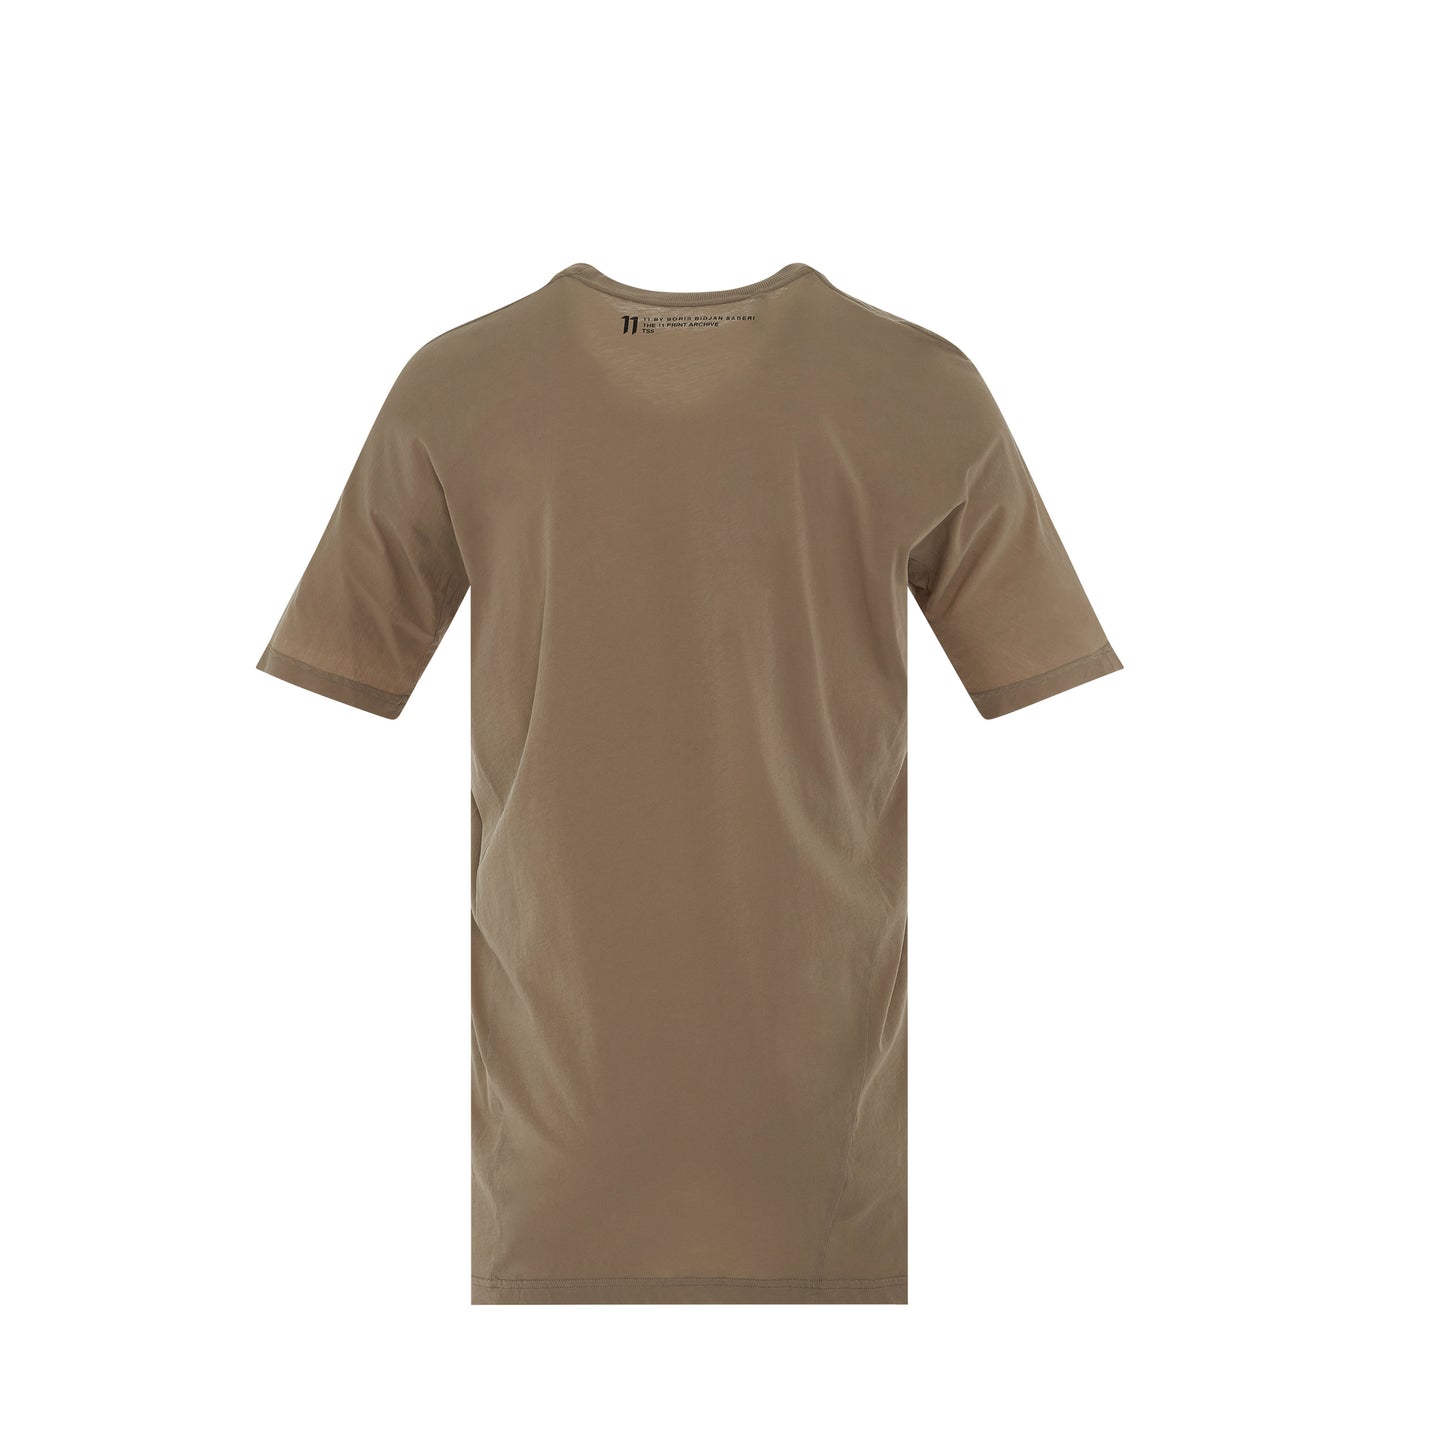 Classic Object Dyed T-Shirt in Gum